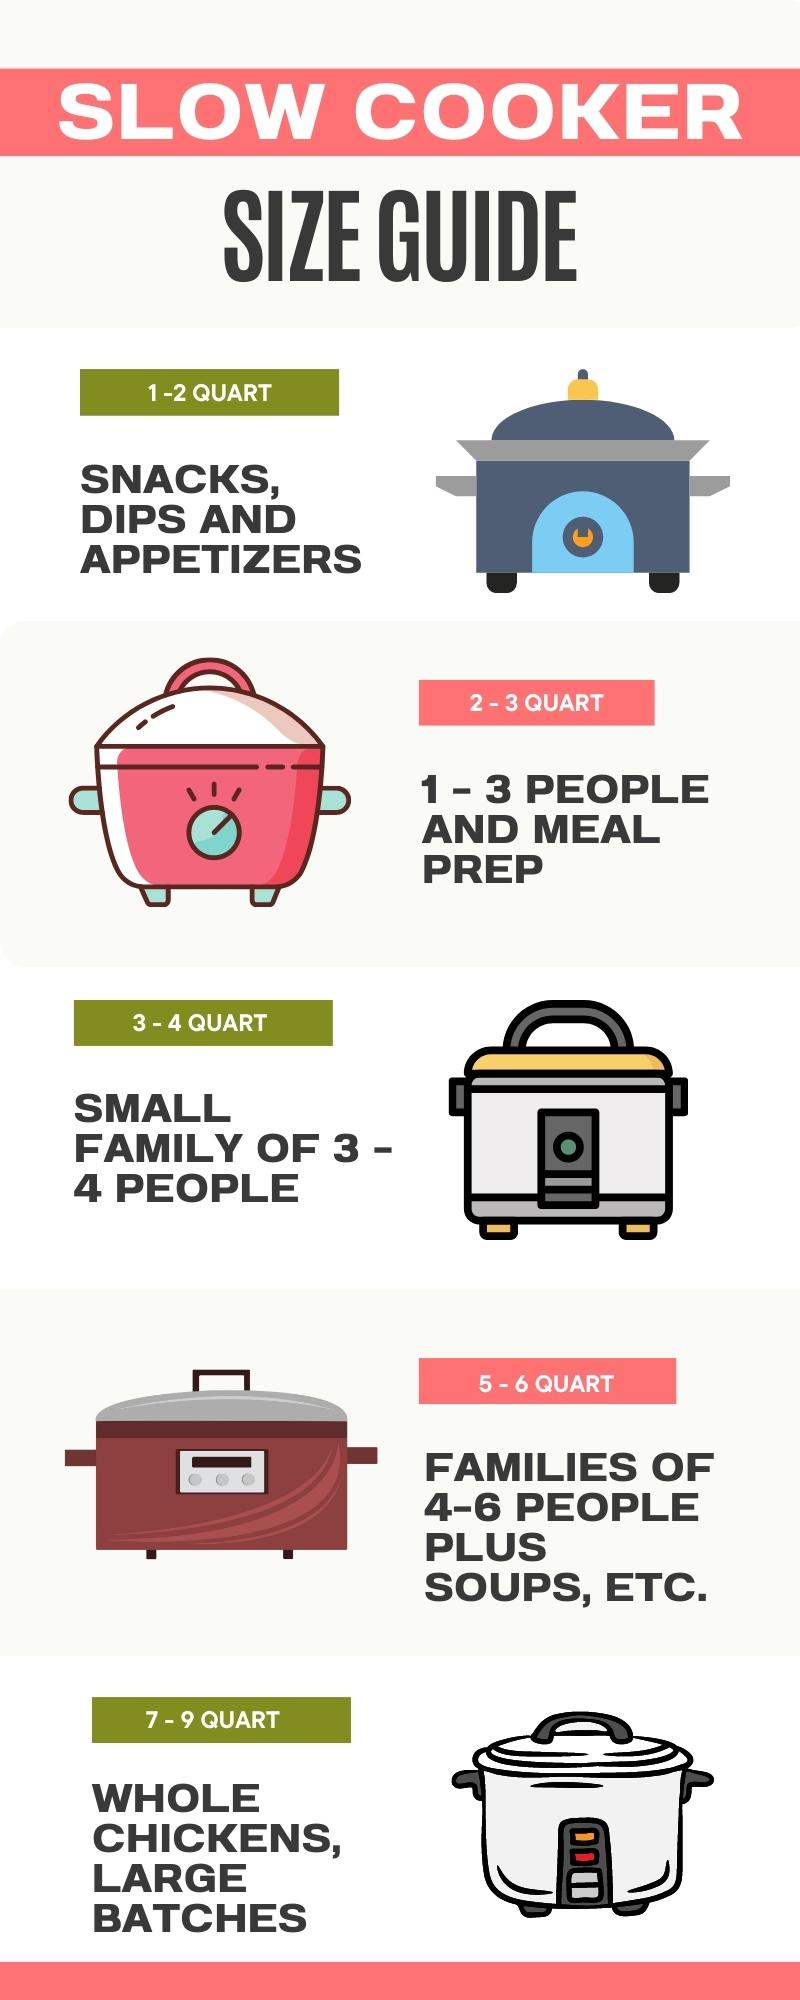 Infographic with a guide for different sized slow cookers